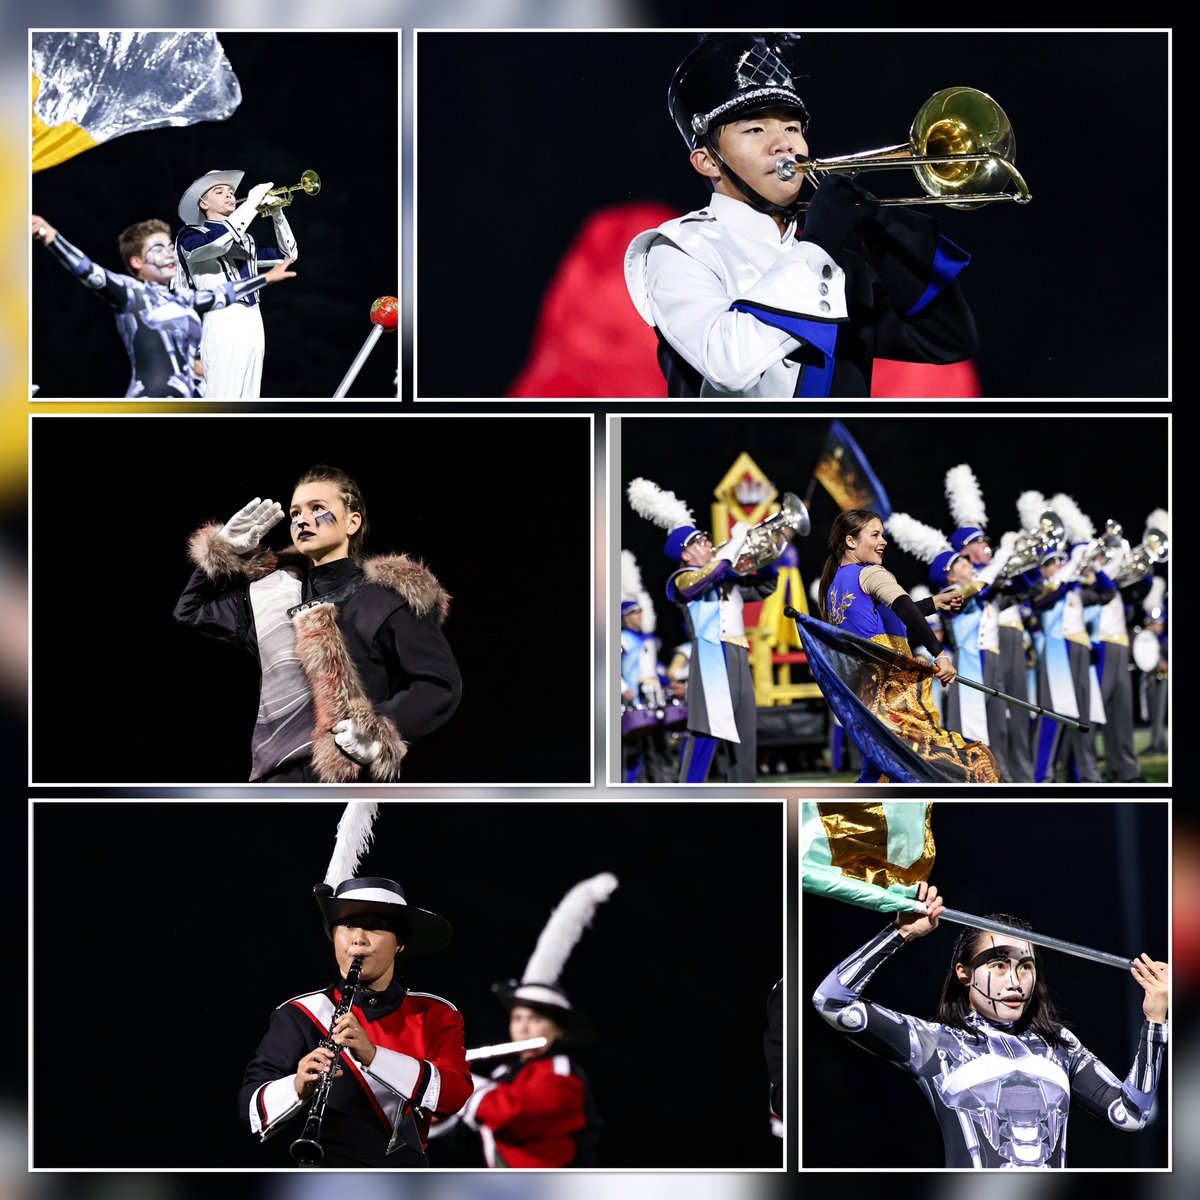 2023 - Year in Review

Rhythm by the River

imagesbylegacyinaction.com

#LegacyInAction
#SportsPhotography
#ActionPhotography
#MarchingBand